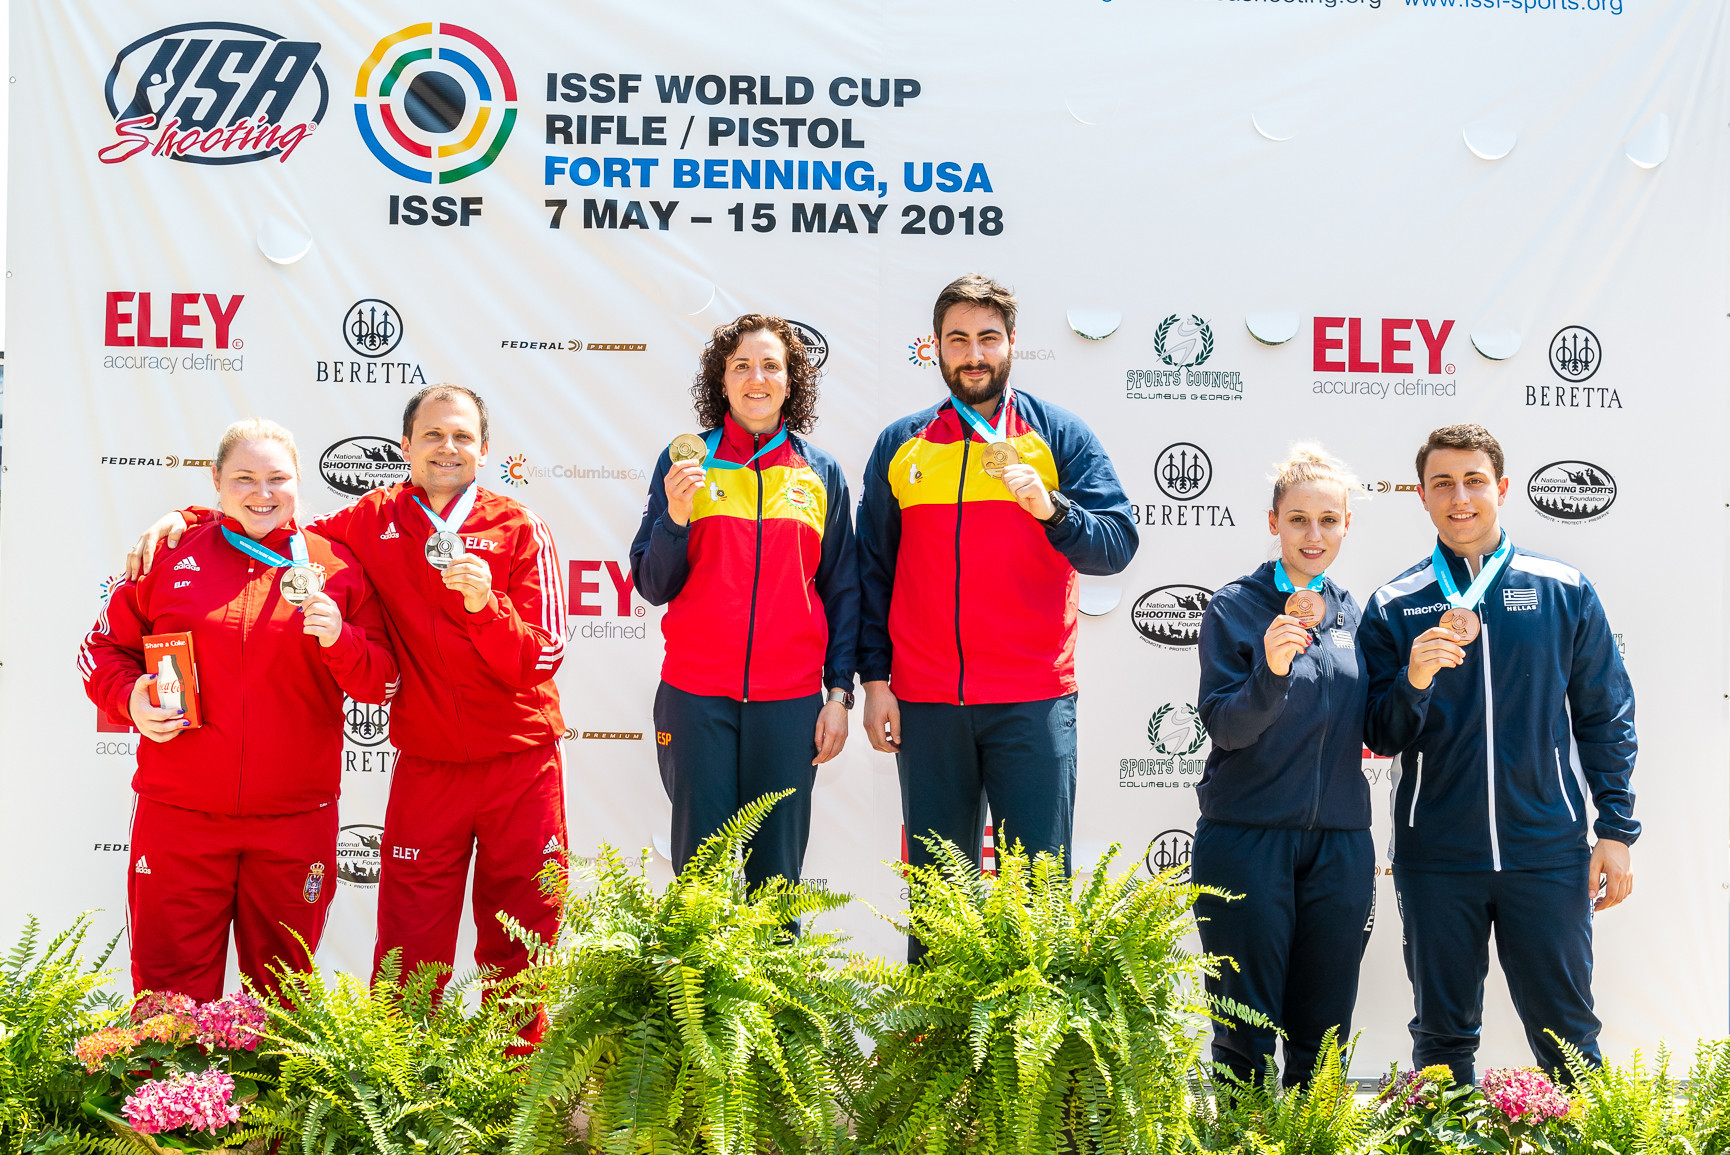 Spain also clinched a final day title in Fort Benning ©ISSF